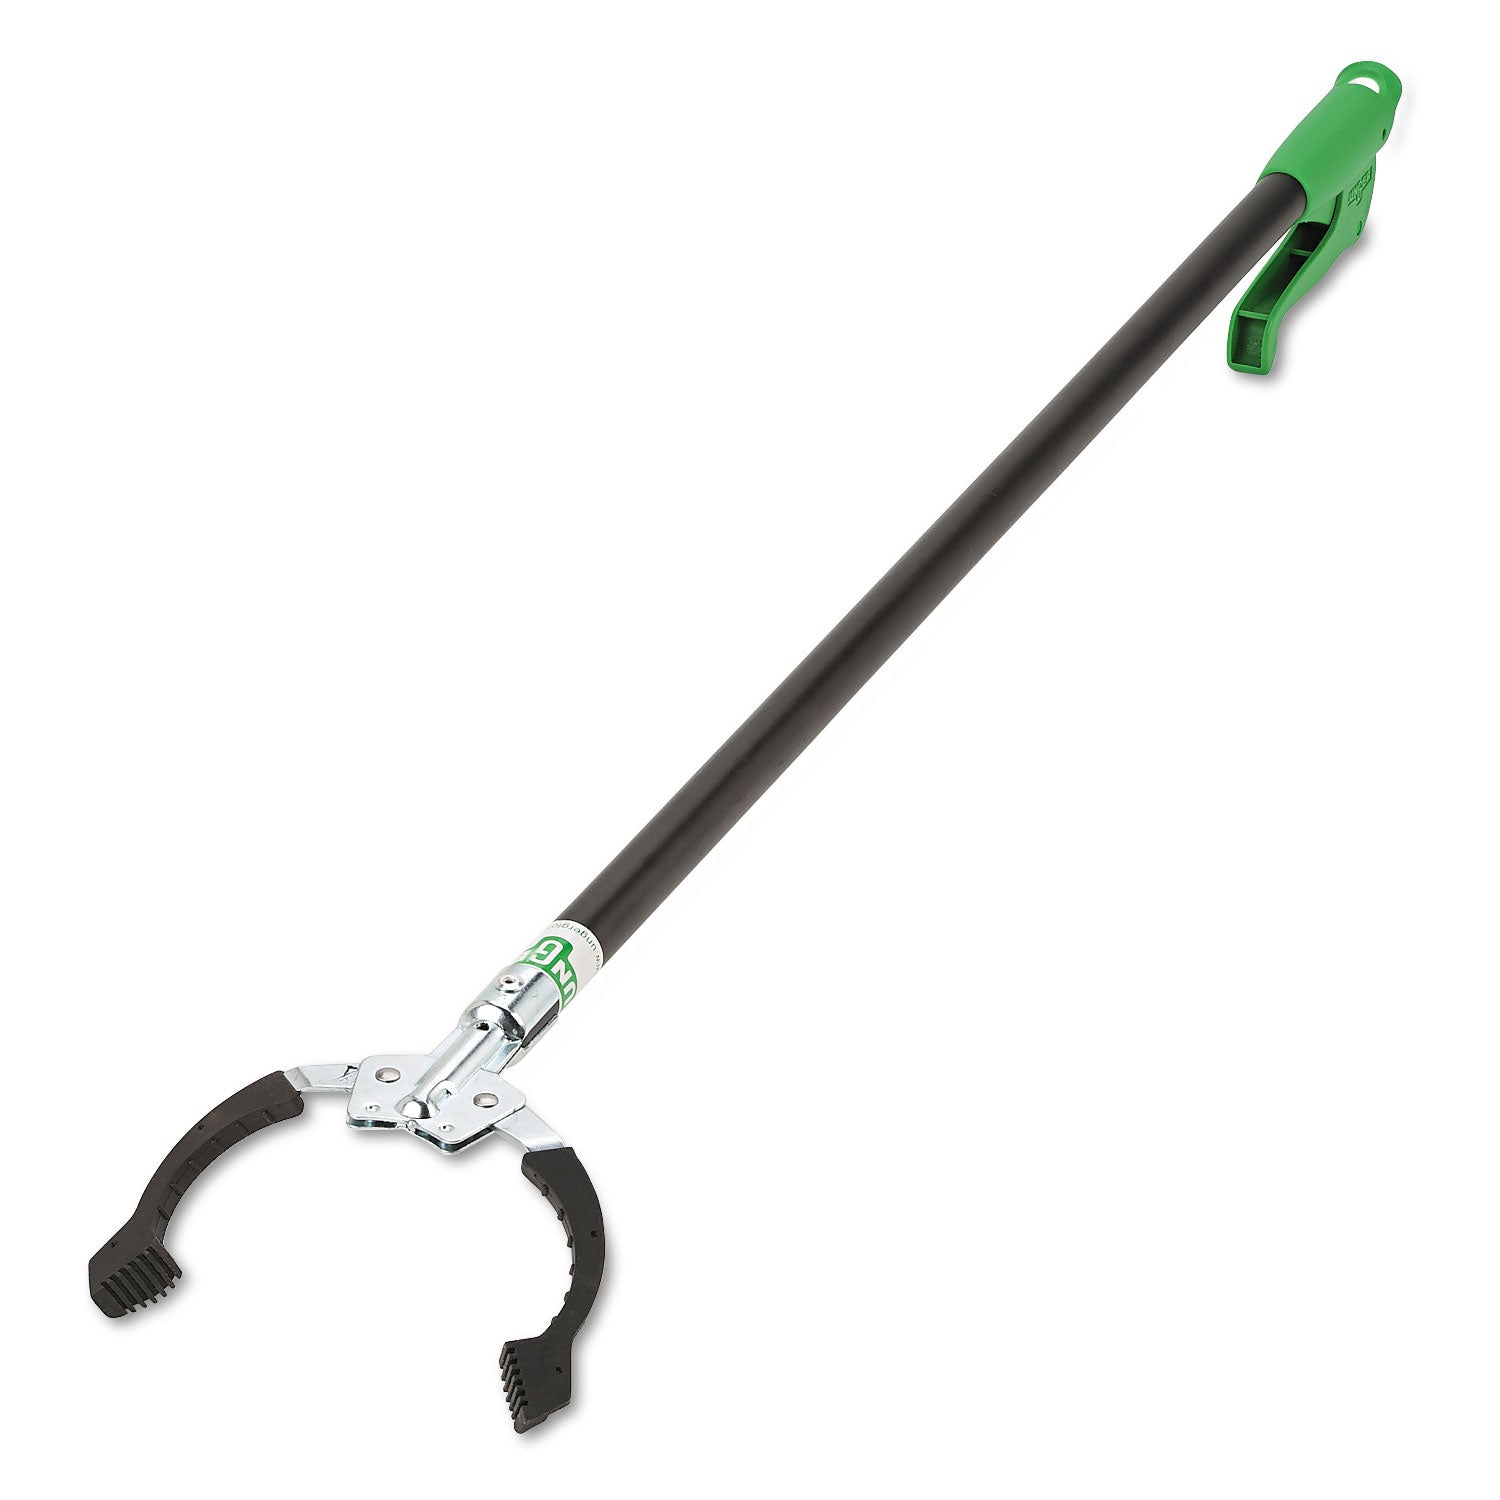 Nifty Nabber Extension Arm with Claw, 36", Black/Green - 